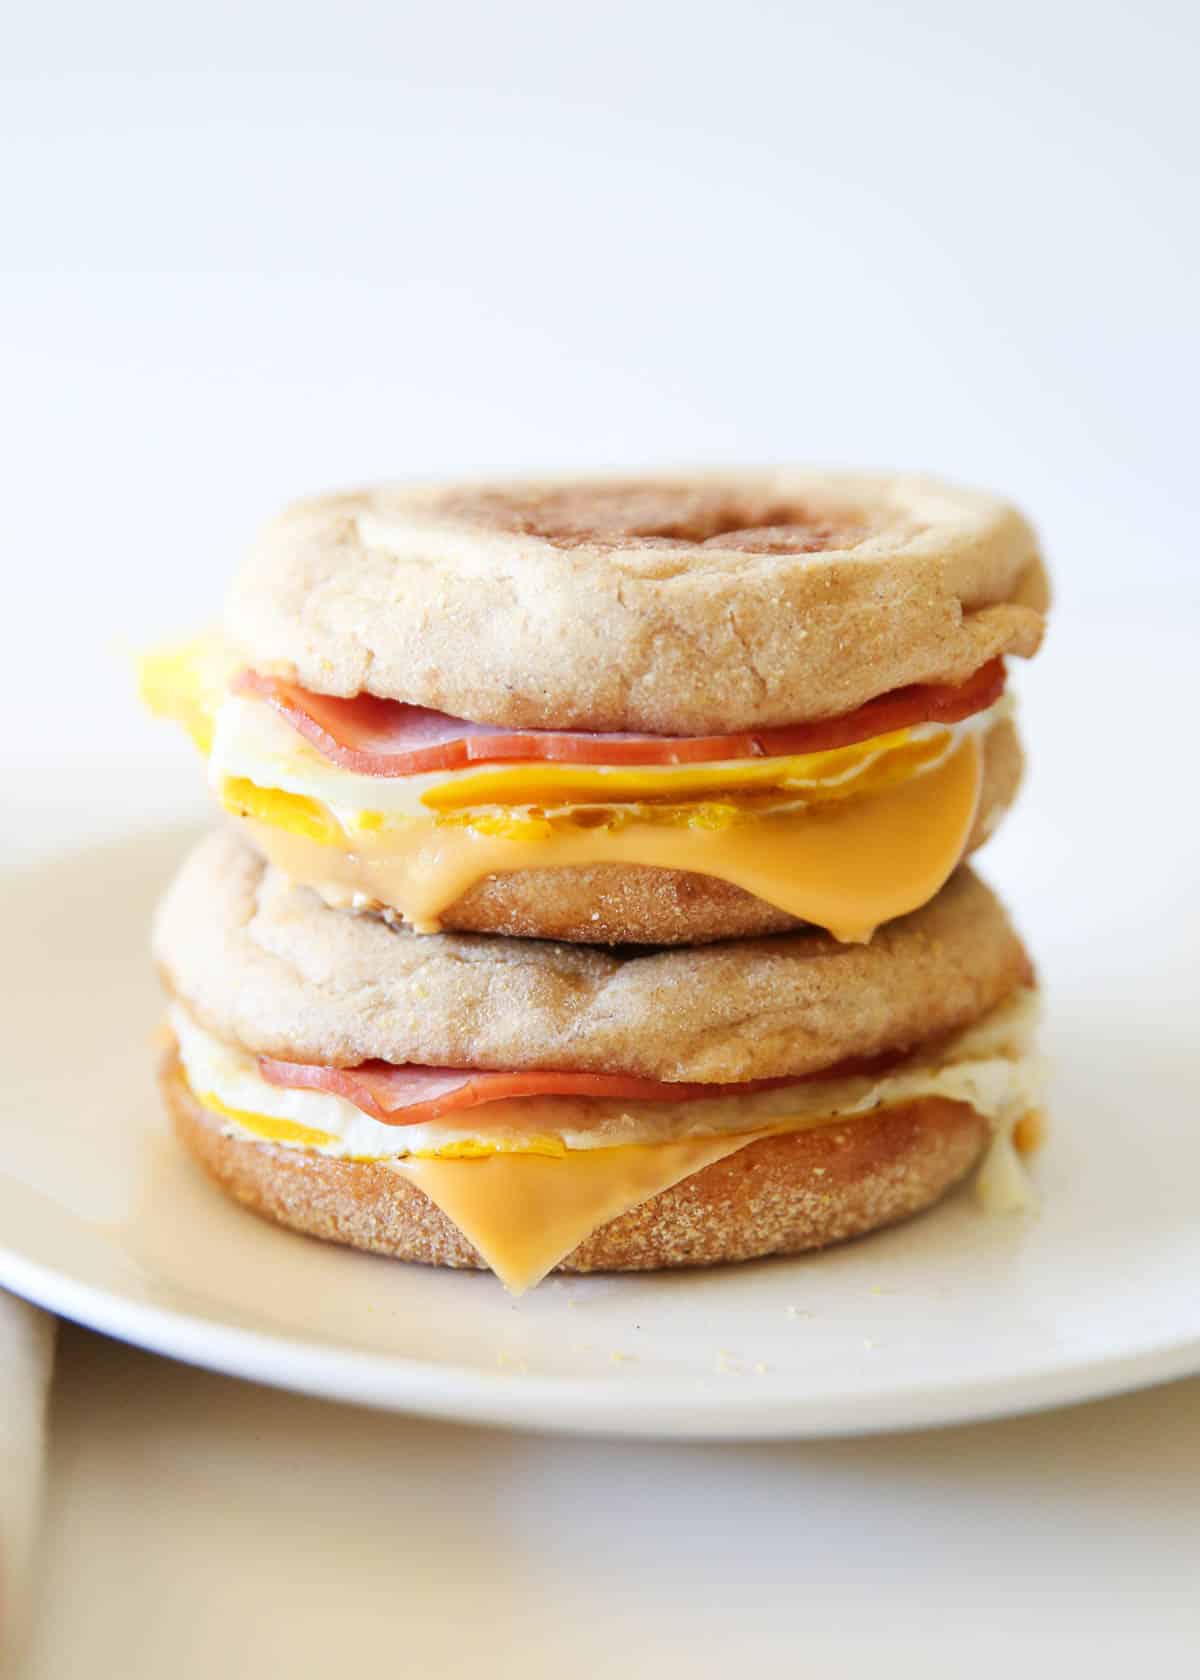 Egg mcmuffins on a plate.